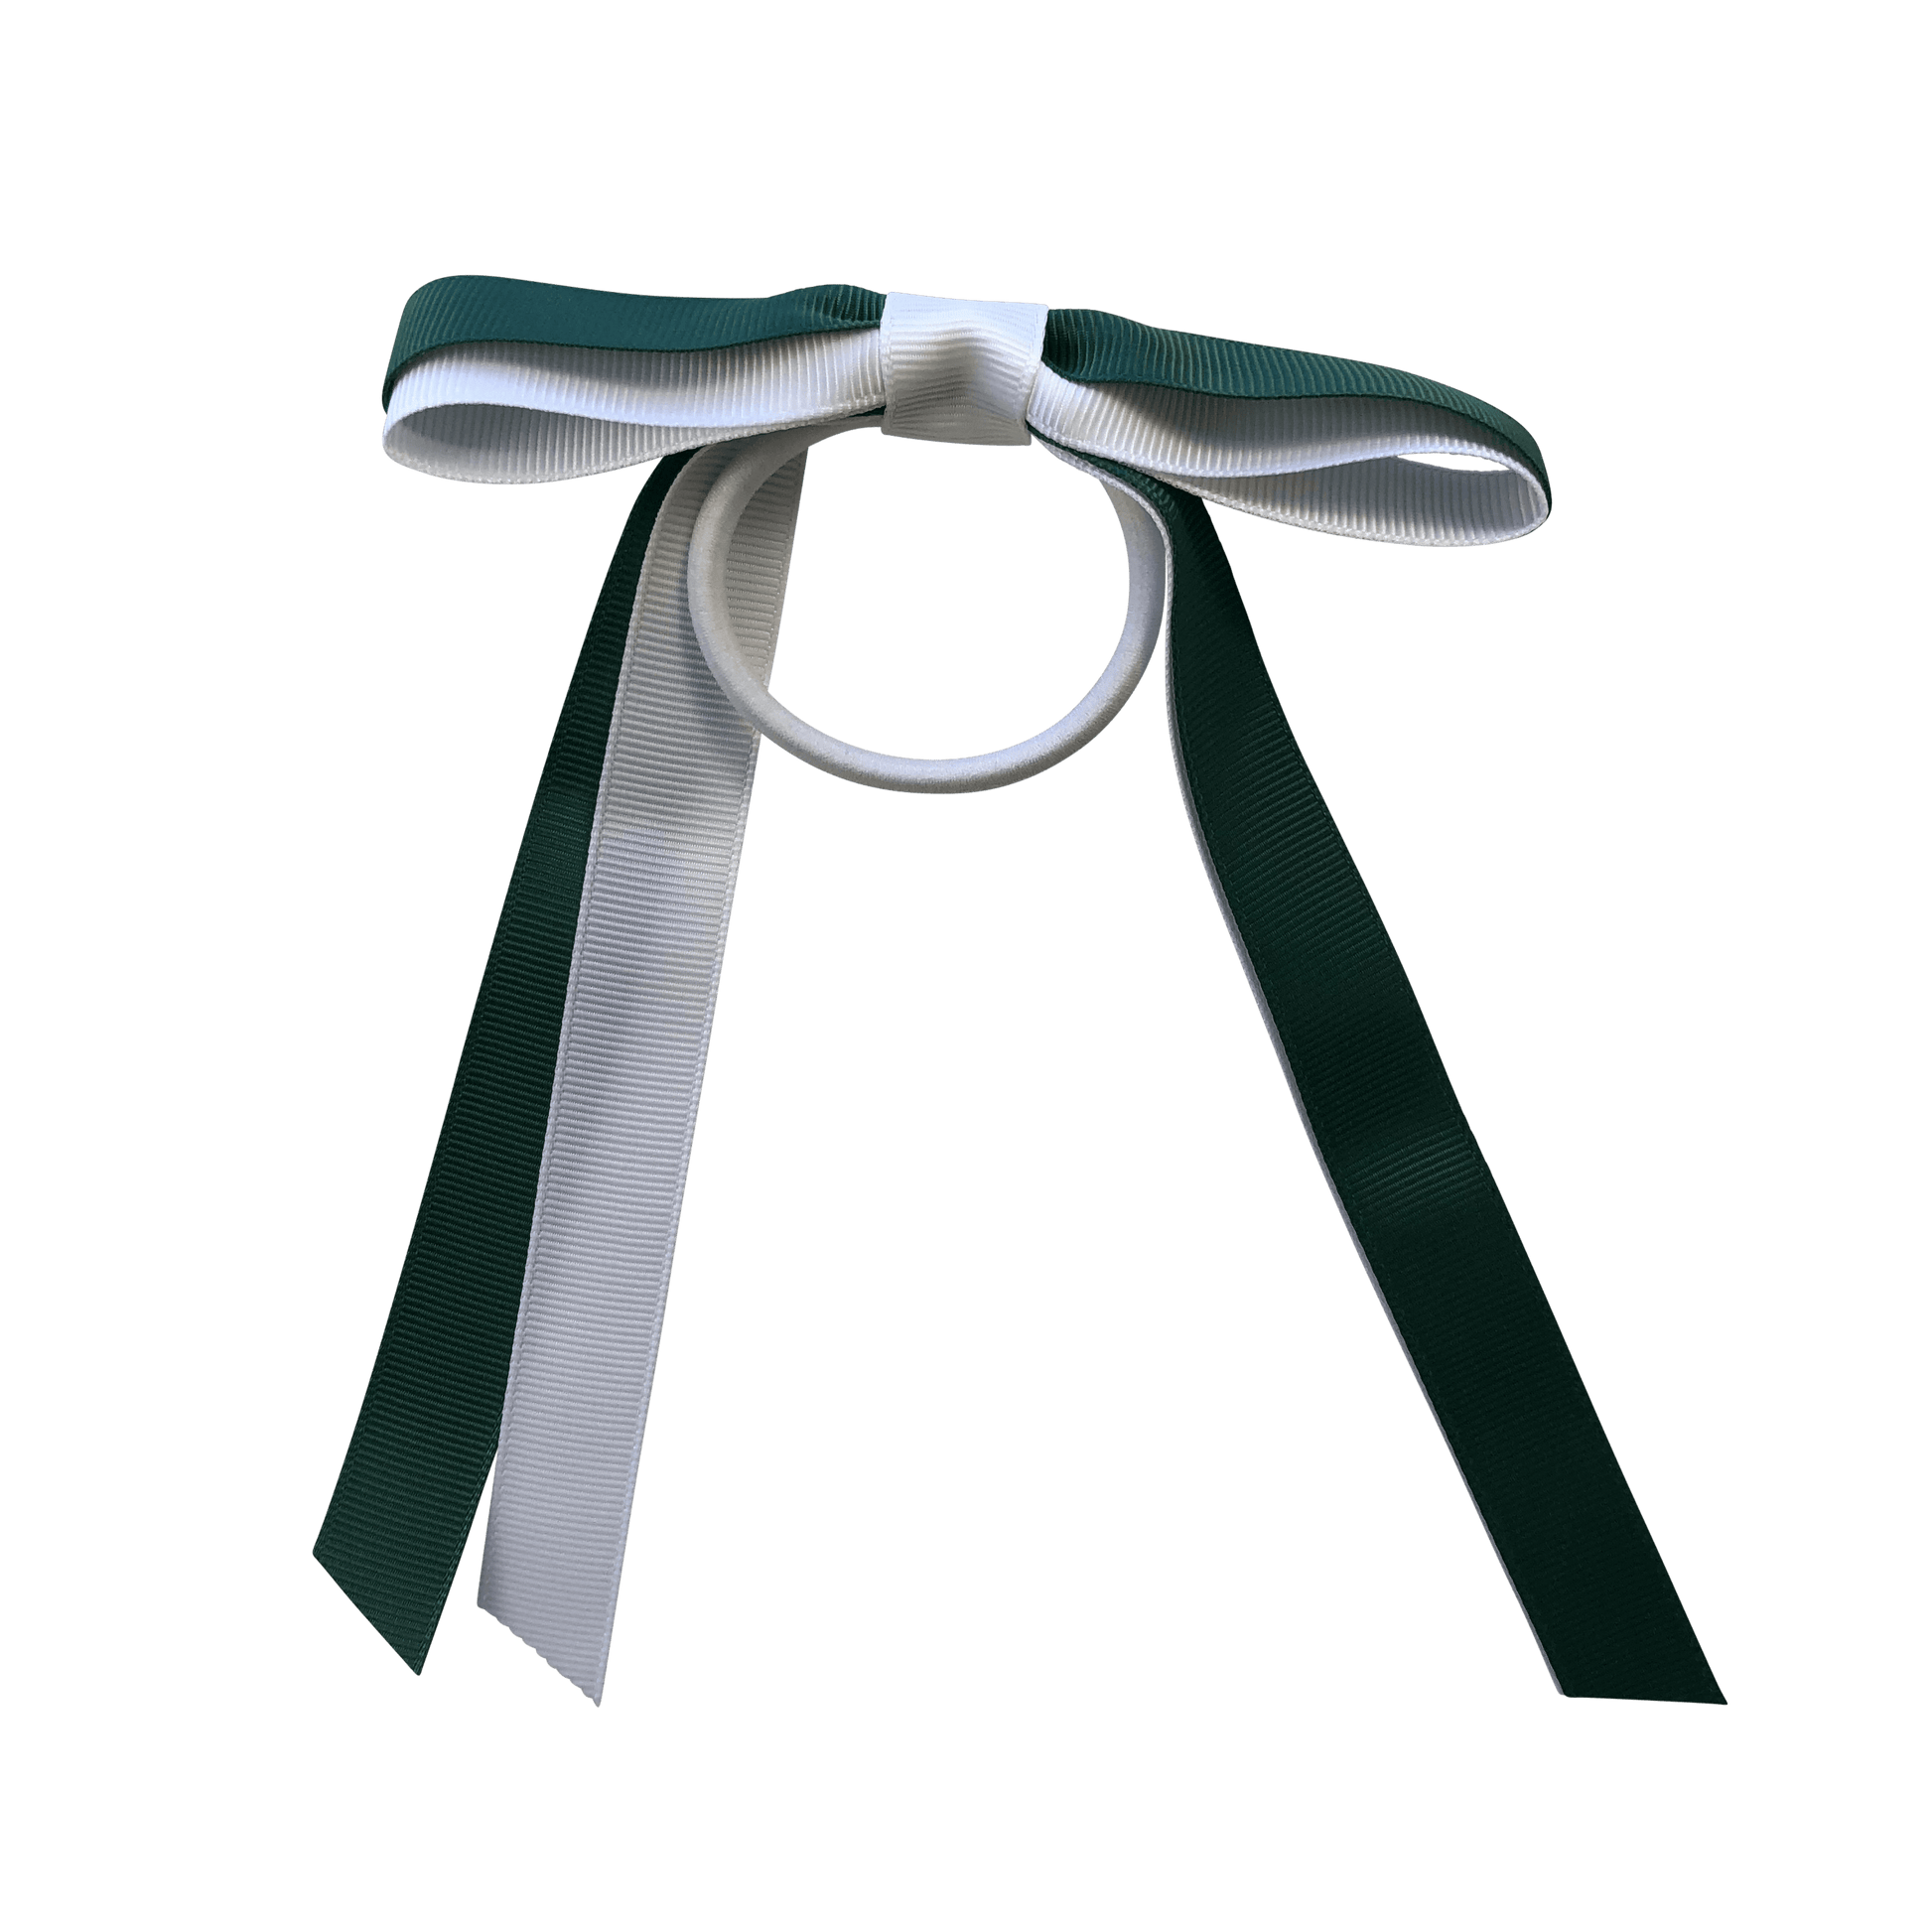 Bottle Green & White Hair Accessories - Assorted Hair Accessories - School Uniform Hair Accessories - Ponytails and Fairytales